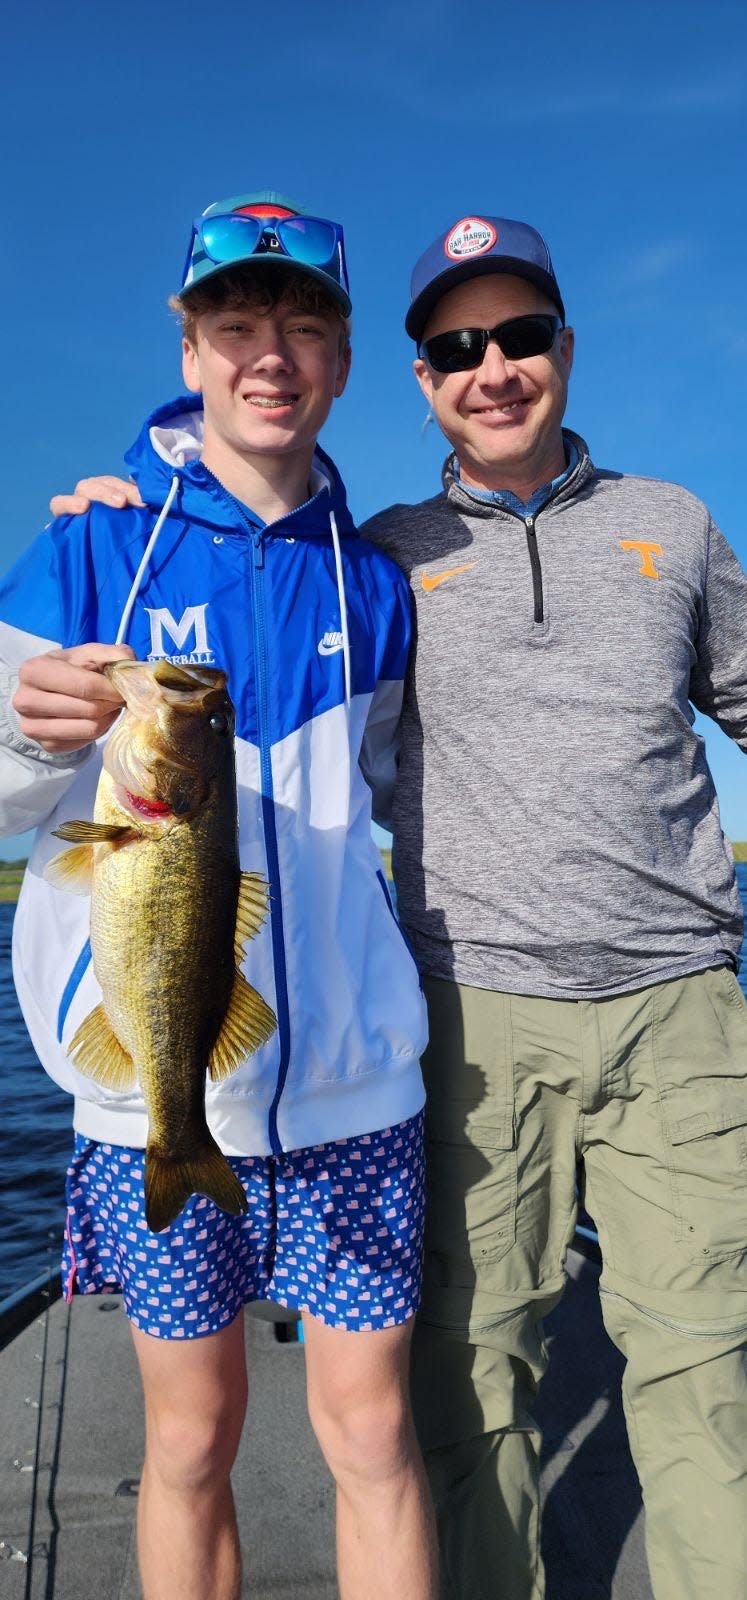 Mark and David Lichford came down from Chattanooga, Tenn., on a fishing trip with Mike Groshon from Bass Online and had a great time in Lake Toho catching bass.